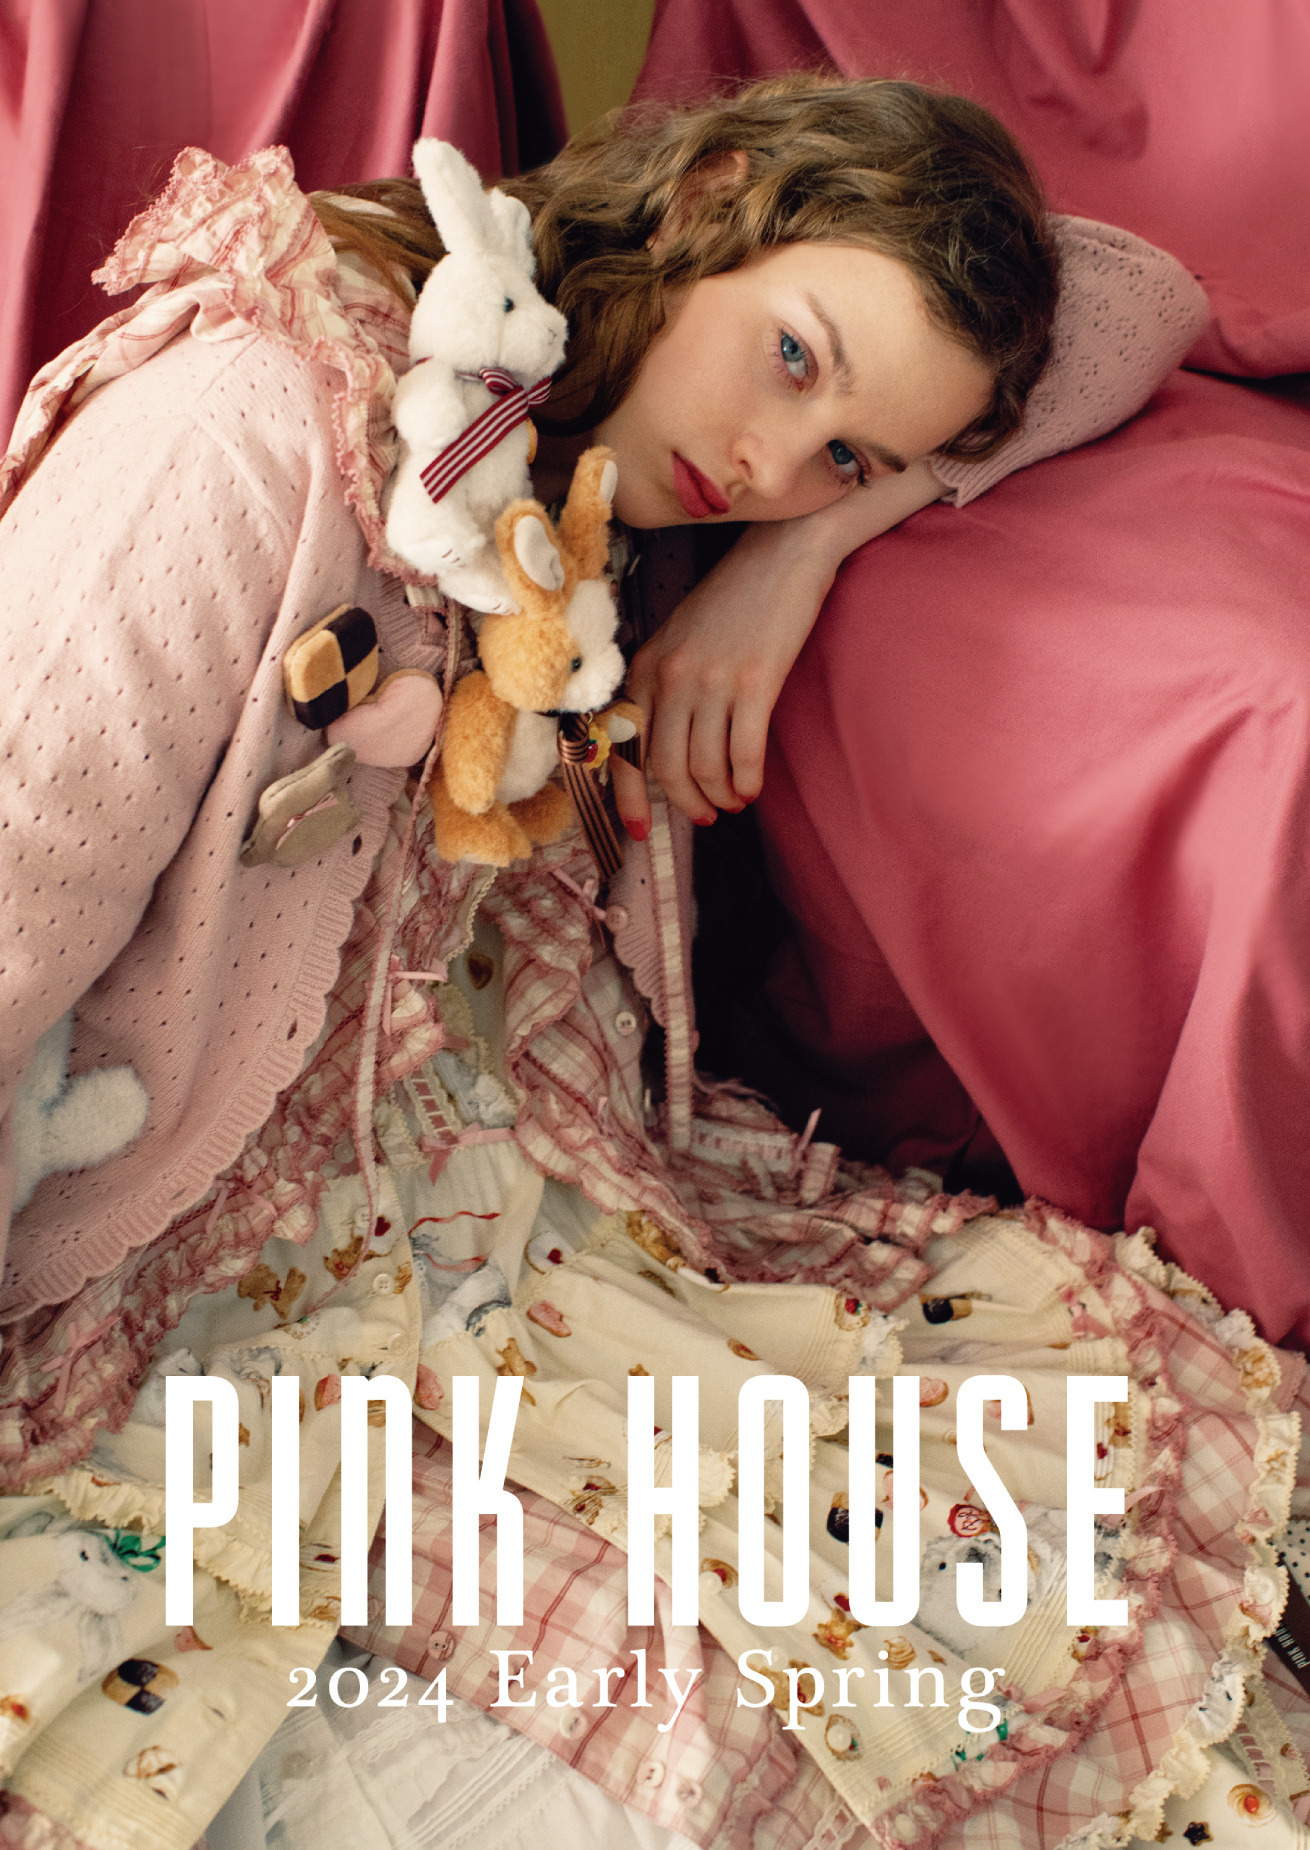 PINKHOUSE 2024 Early Spring